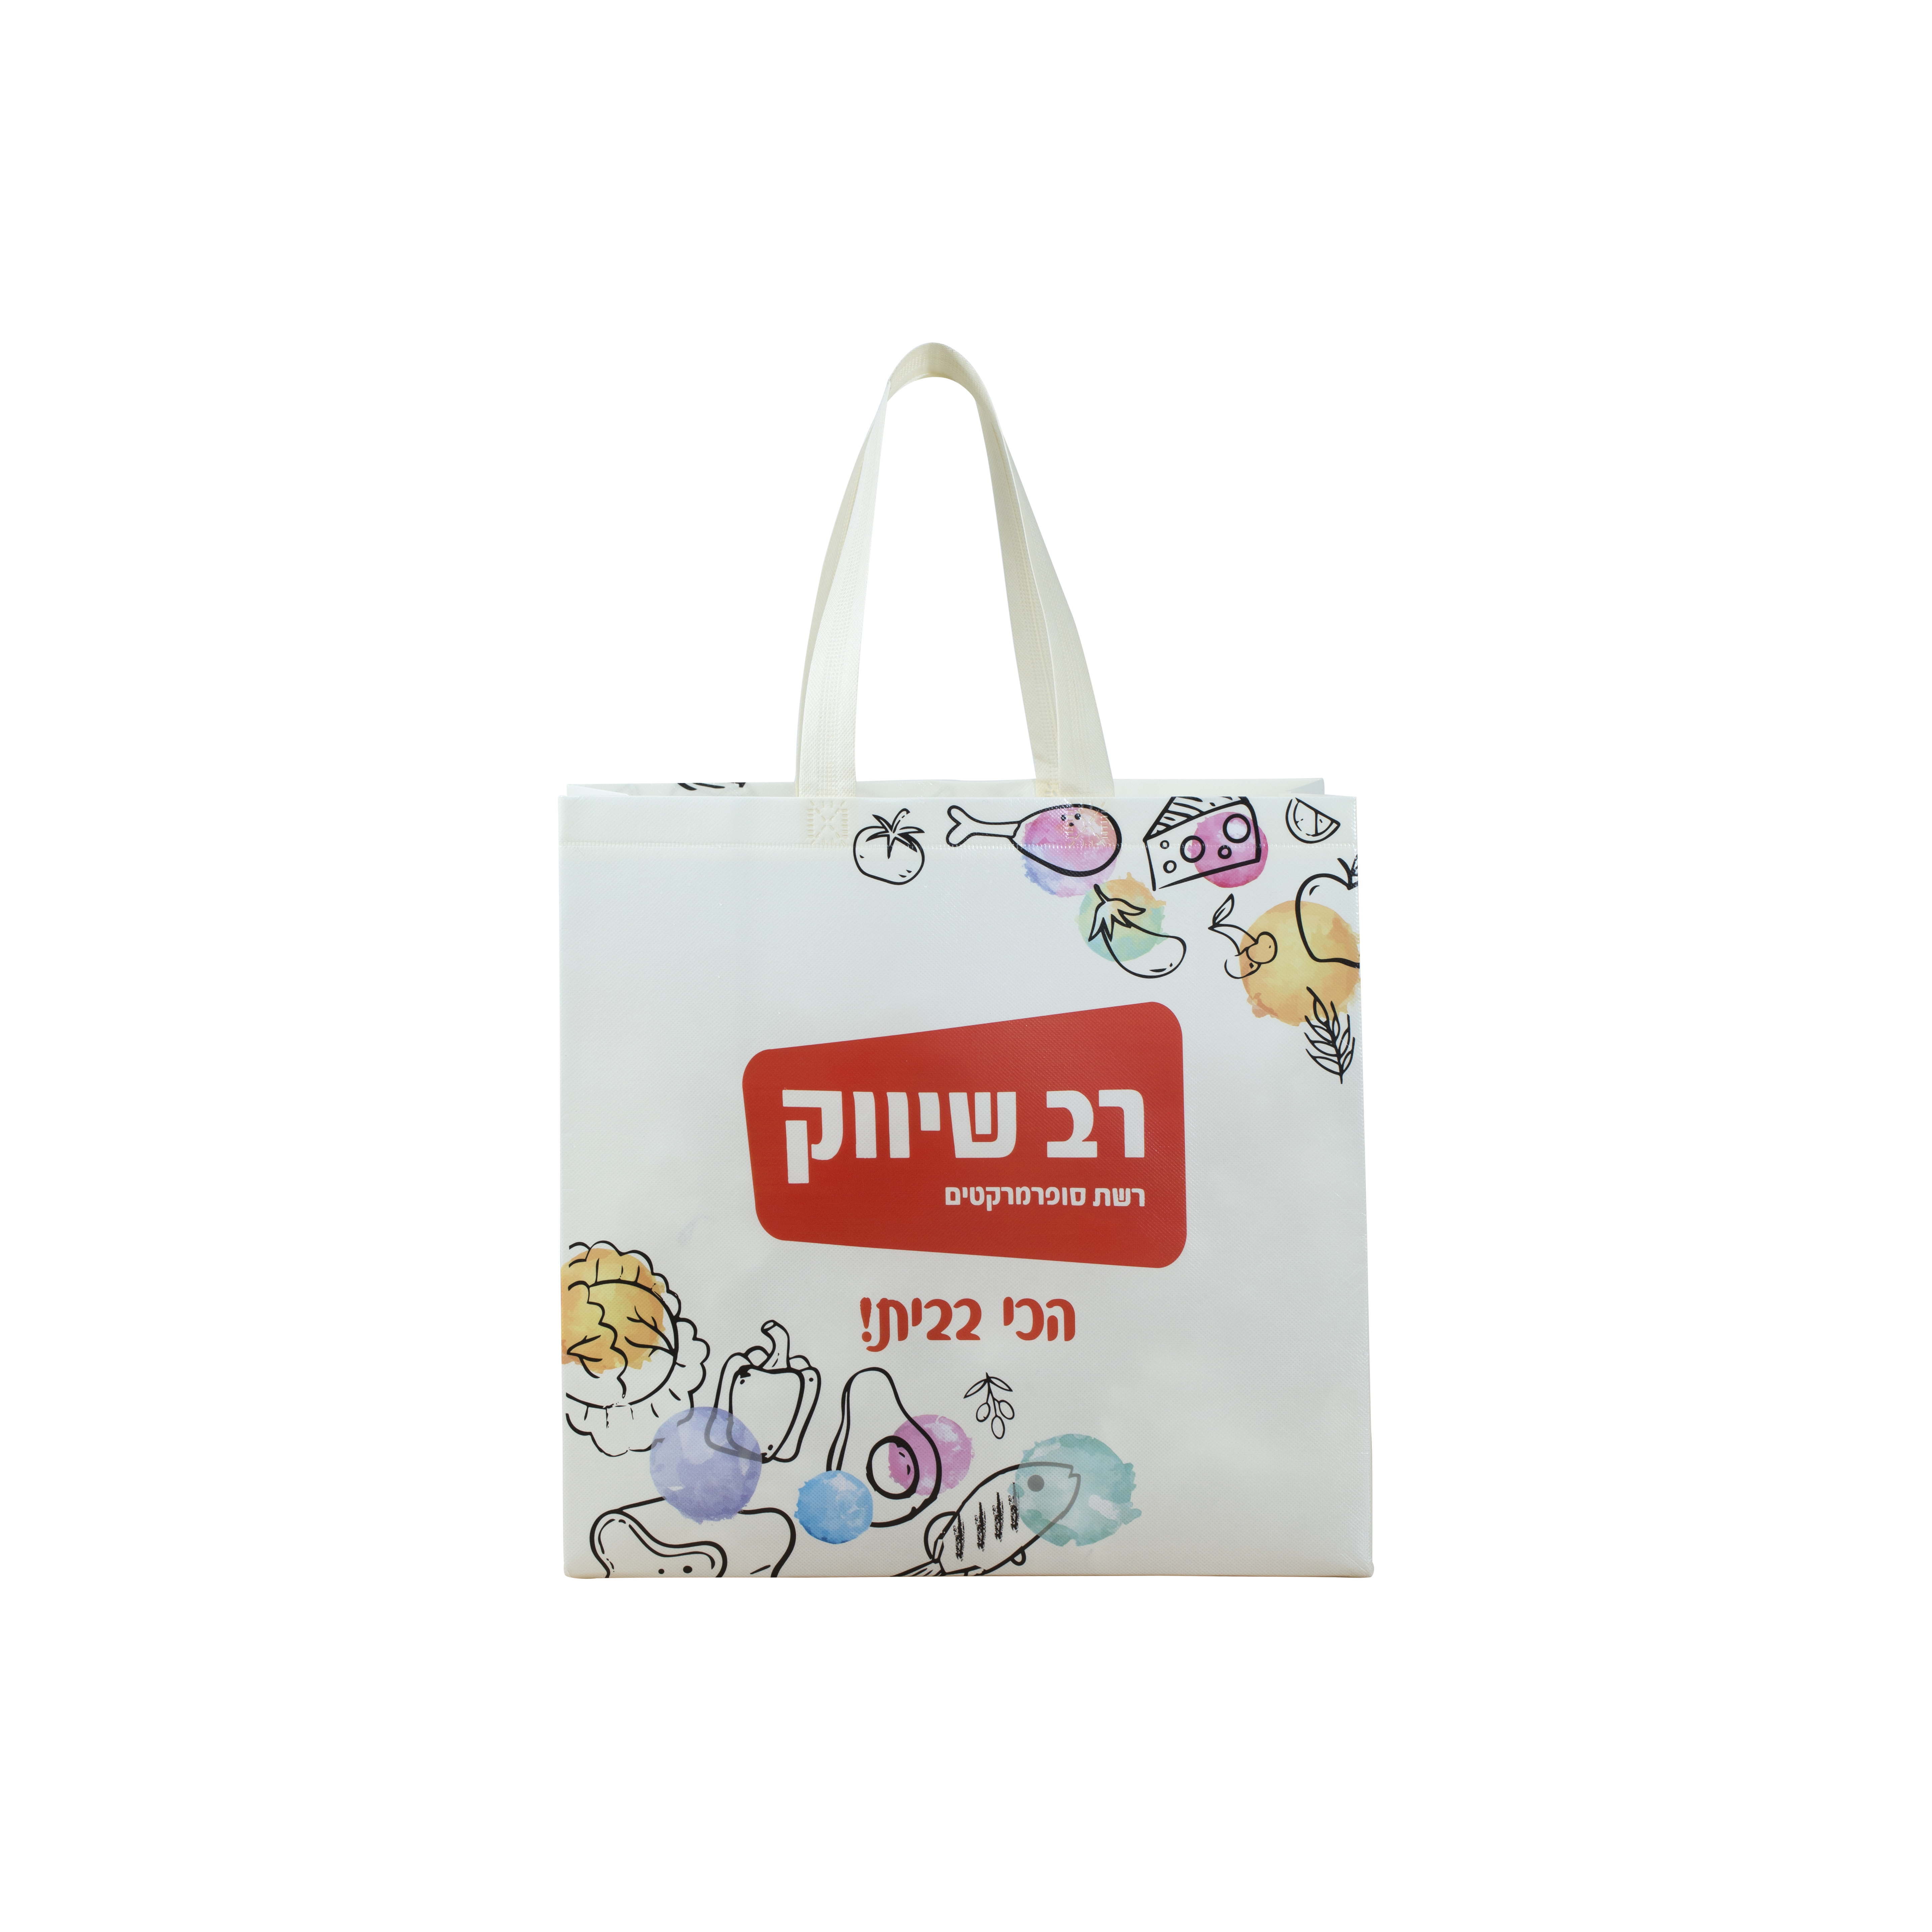 Wholesale non woven grocery bags,custom max non woven shopping bags,pp non woven shopping bags Supply ,shopping non woven bags OEM,custom non woven shopping bags